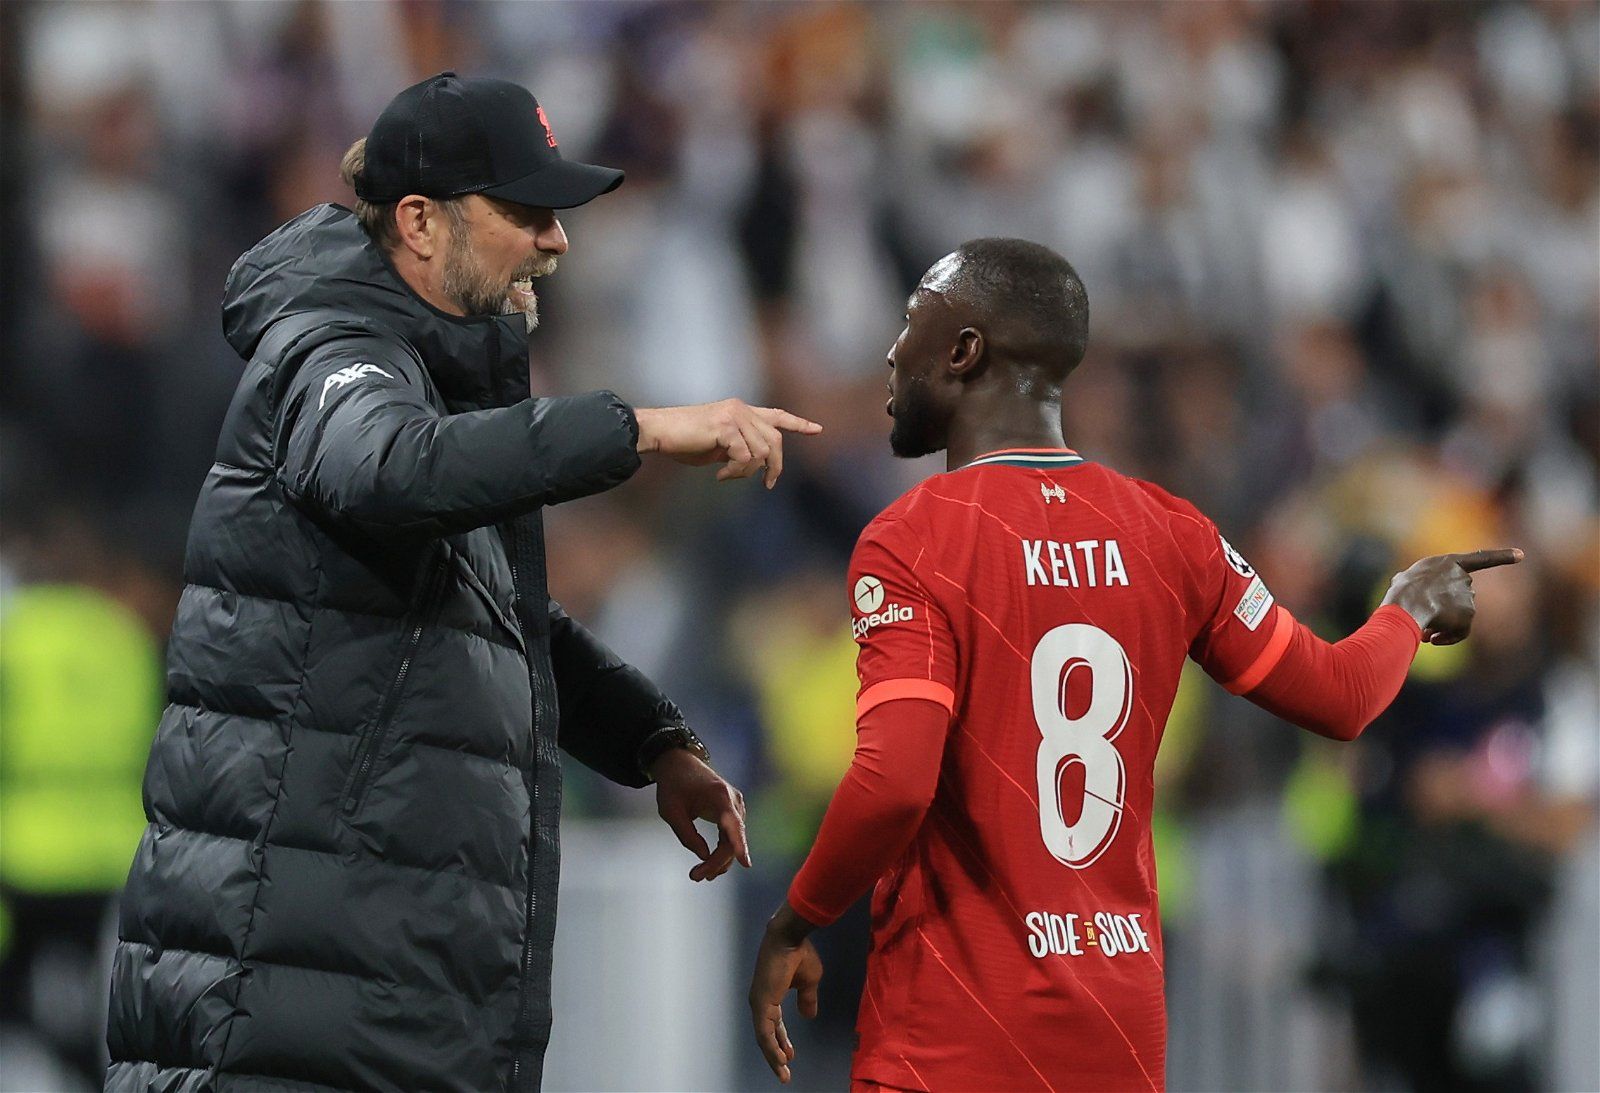 Liverpool: Naby Keita’s future remains in doubt -Liverpool News